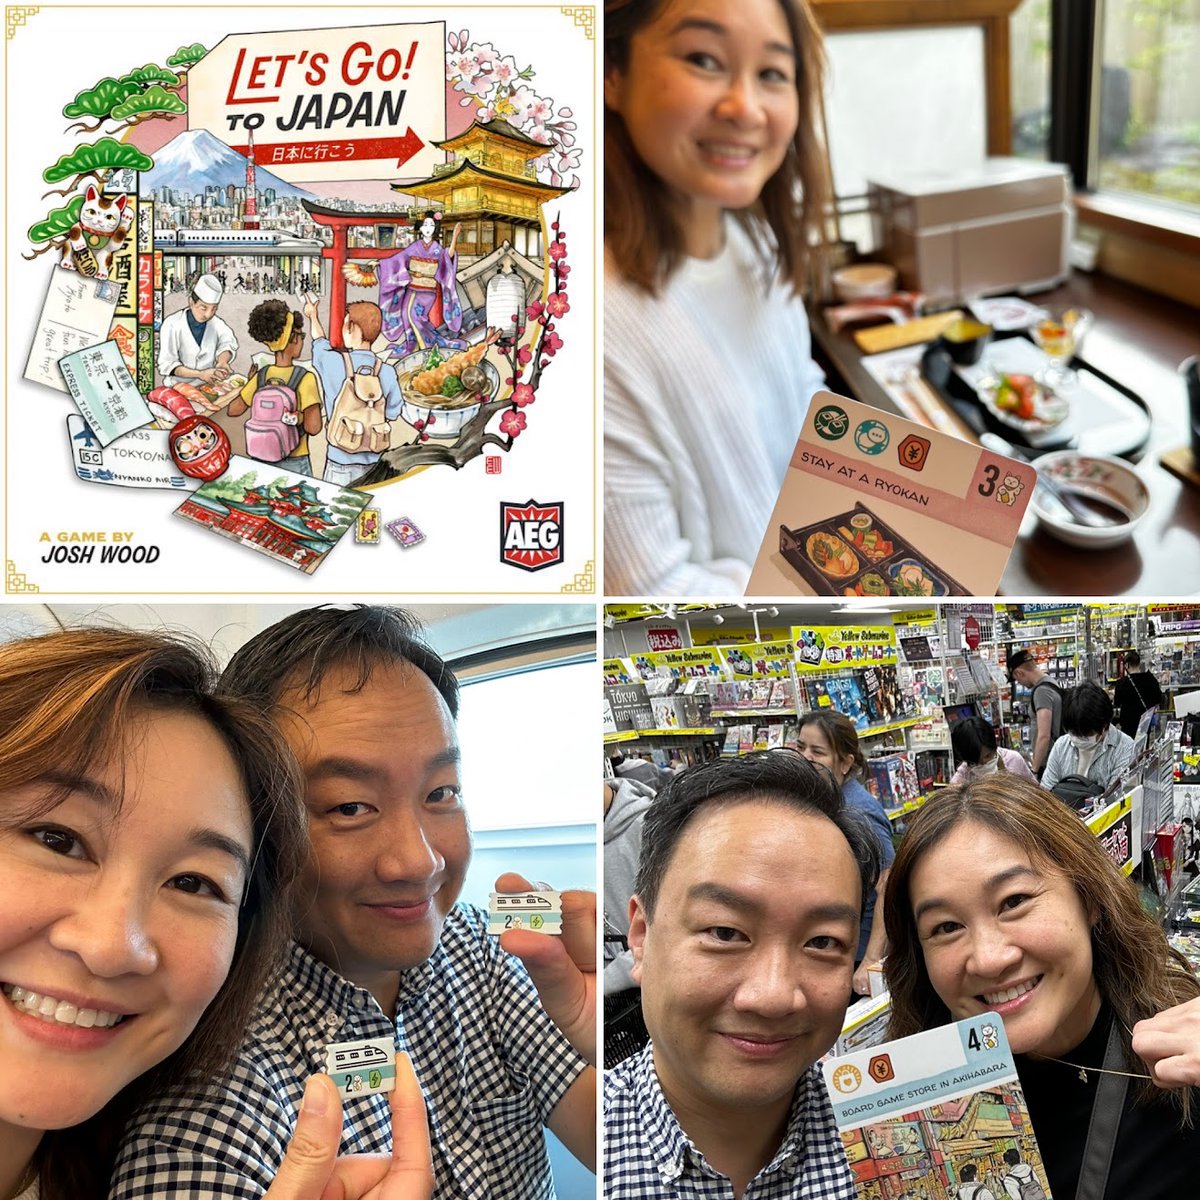 We used Let's Go! To Japan (the board game) to help plan our trip to Japan. Seriously. A photo blog: goinganalogshow.com/article/264/go… @alderac @sirjoshwood